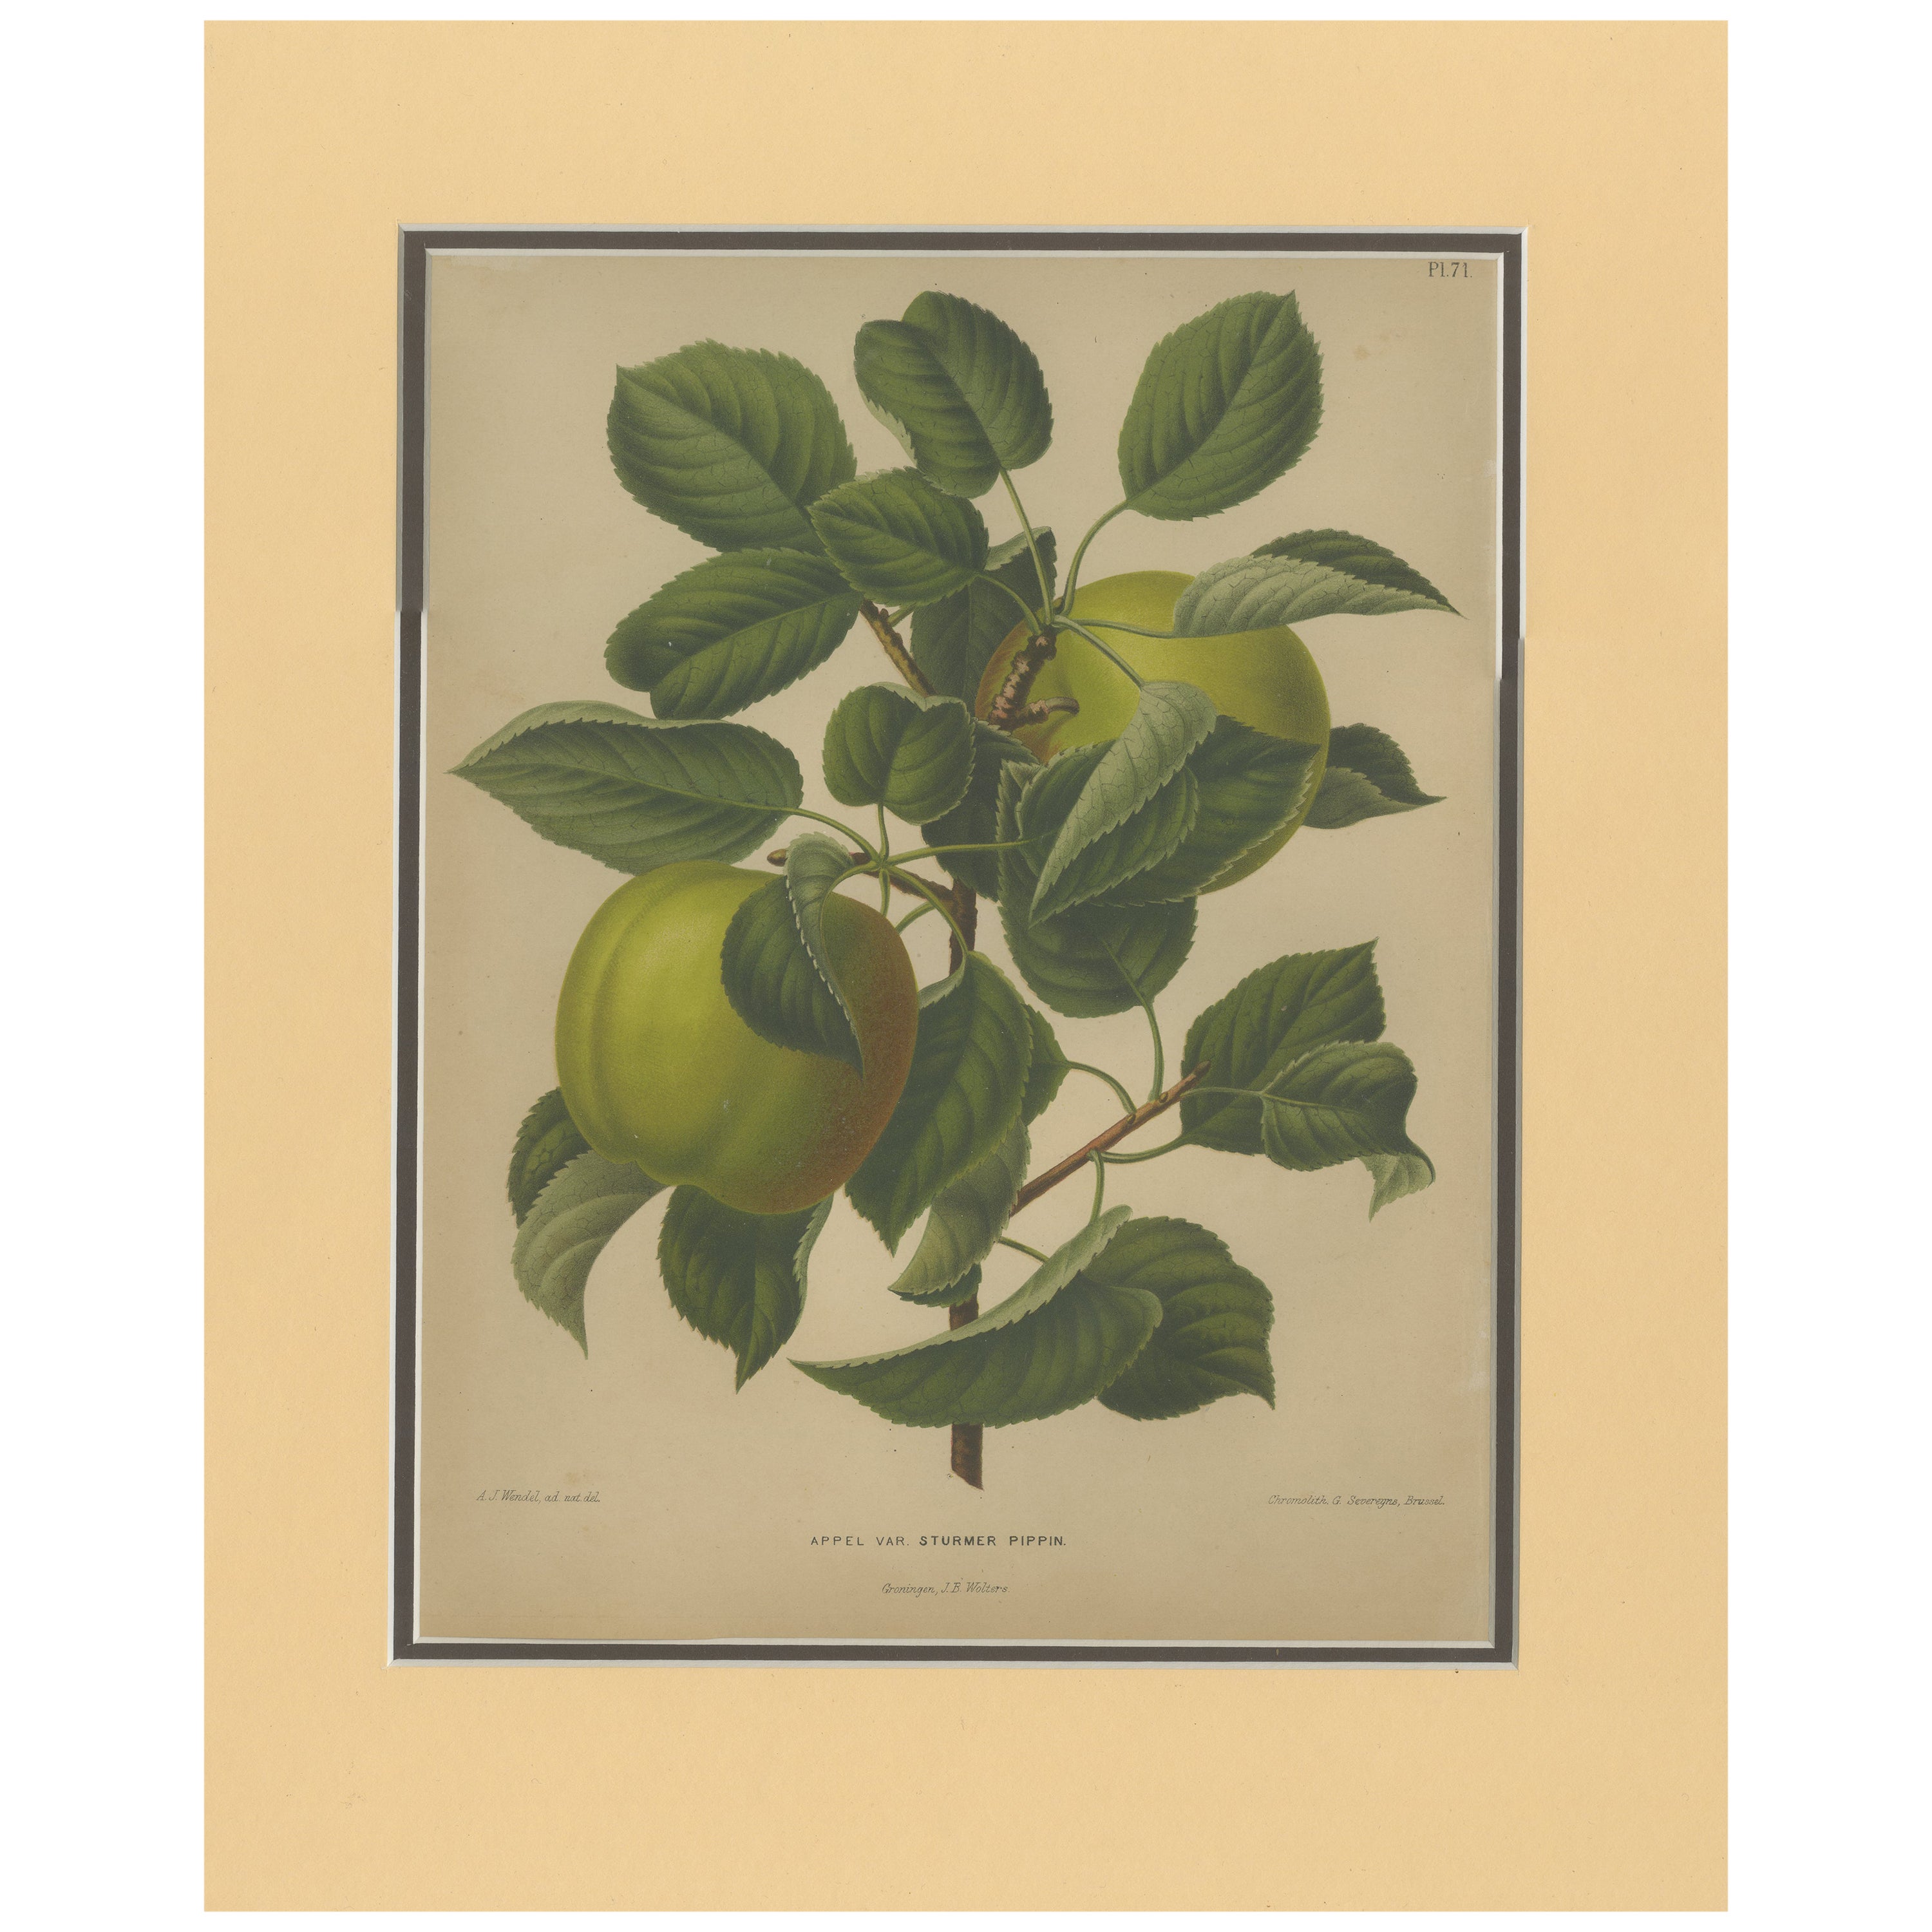 Antique Print of the Sturmer Pippin Apple by Severeyns 'c.1876' For Sale